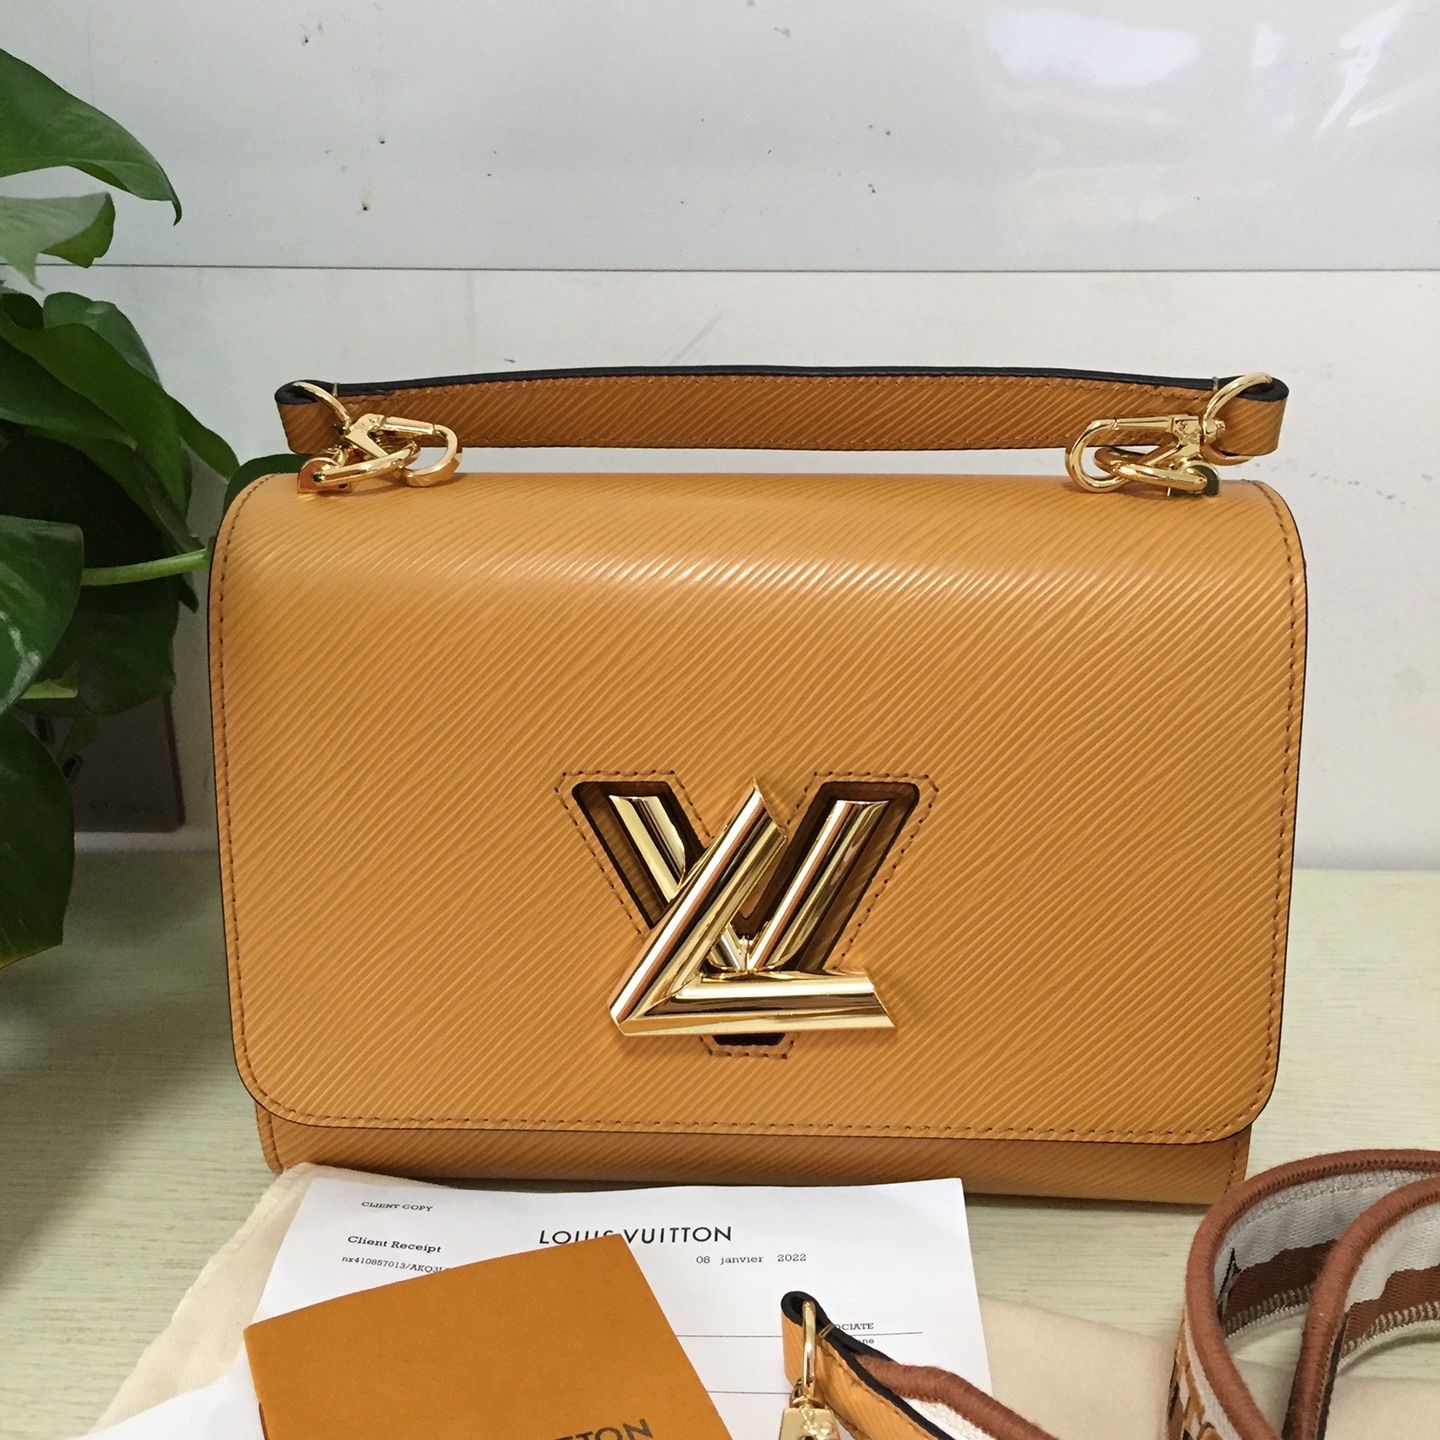 Authentic Louis Vuitton Blue LV Twist Lock Shoulder Bag for Sale in  Strongsville, OH - OfferUp